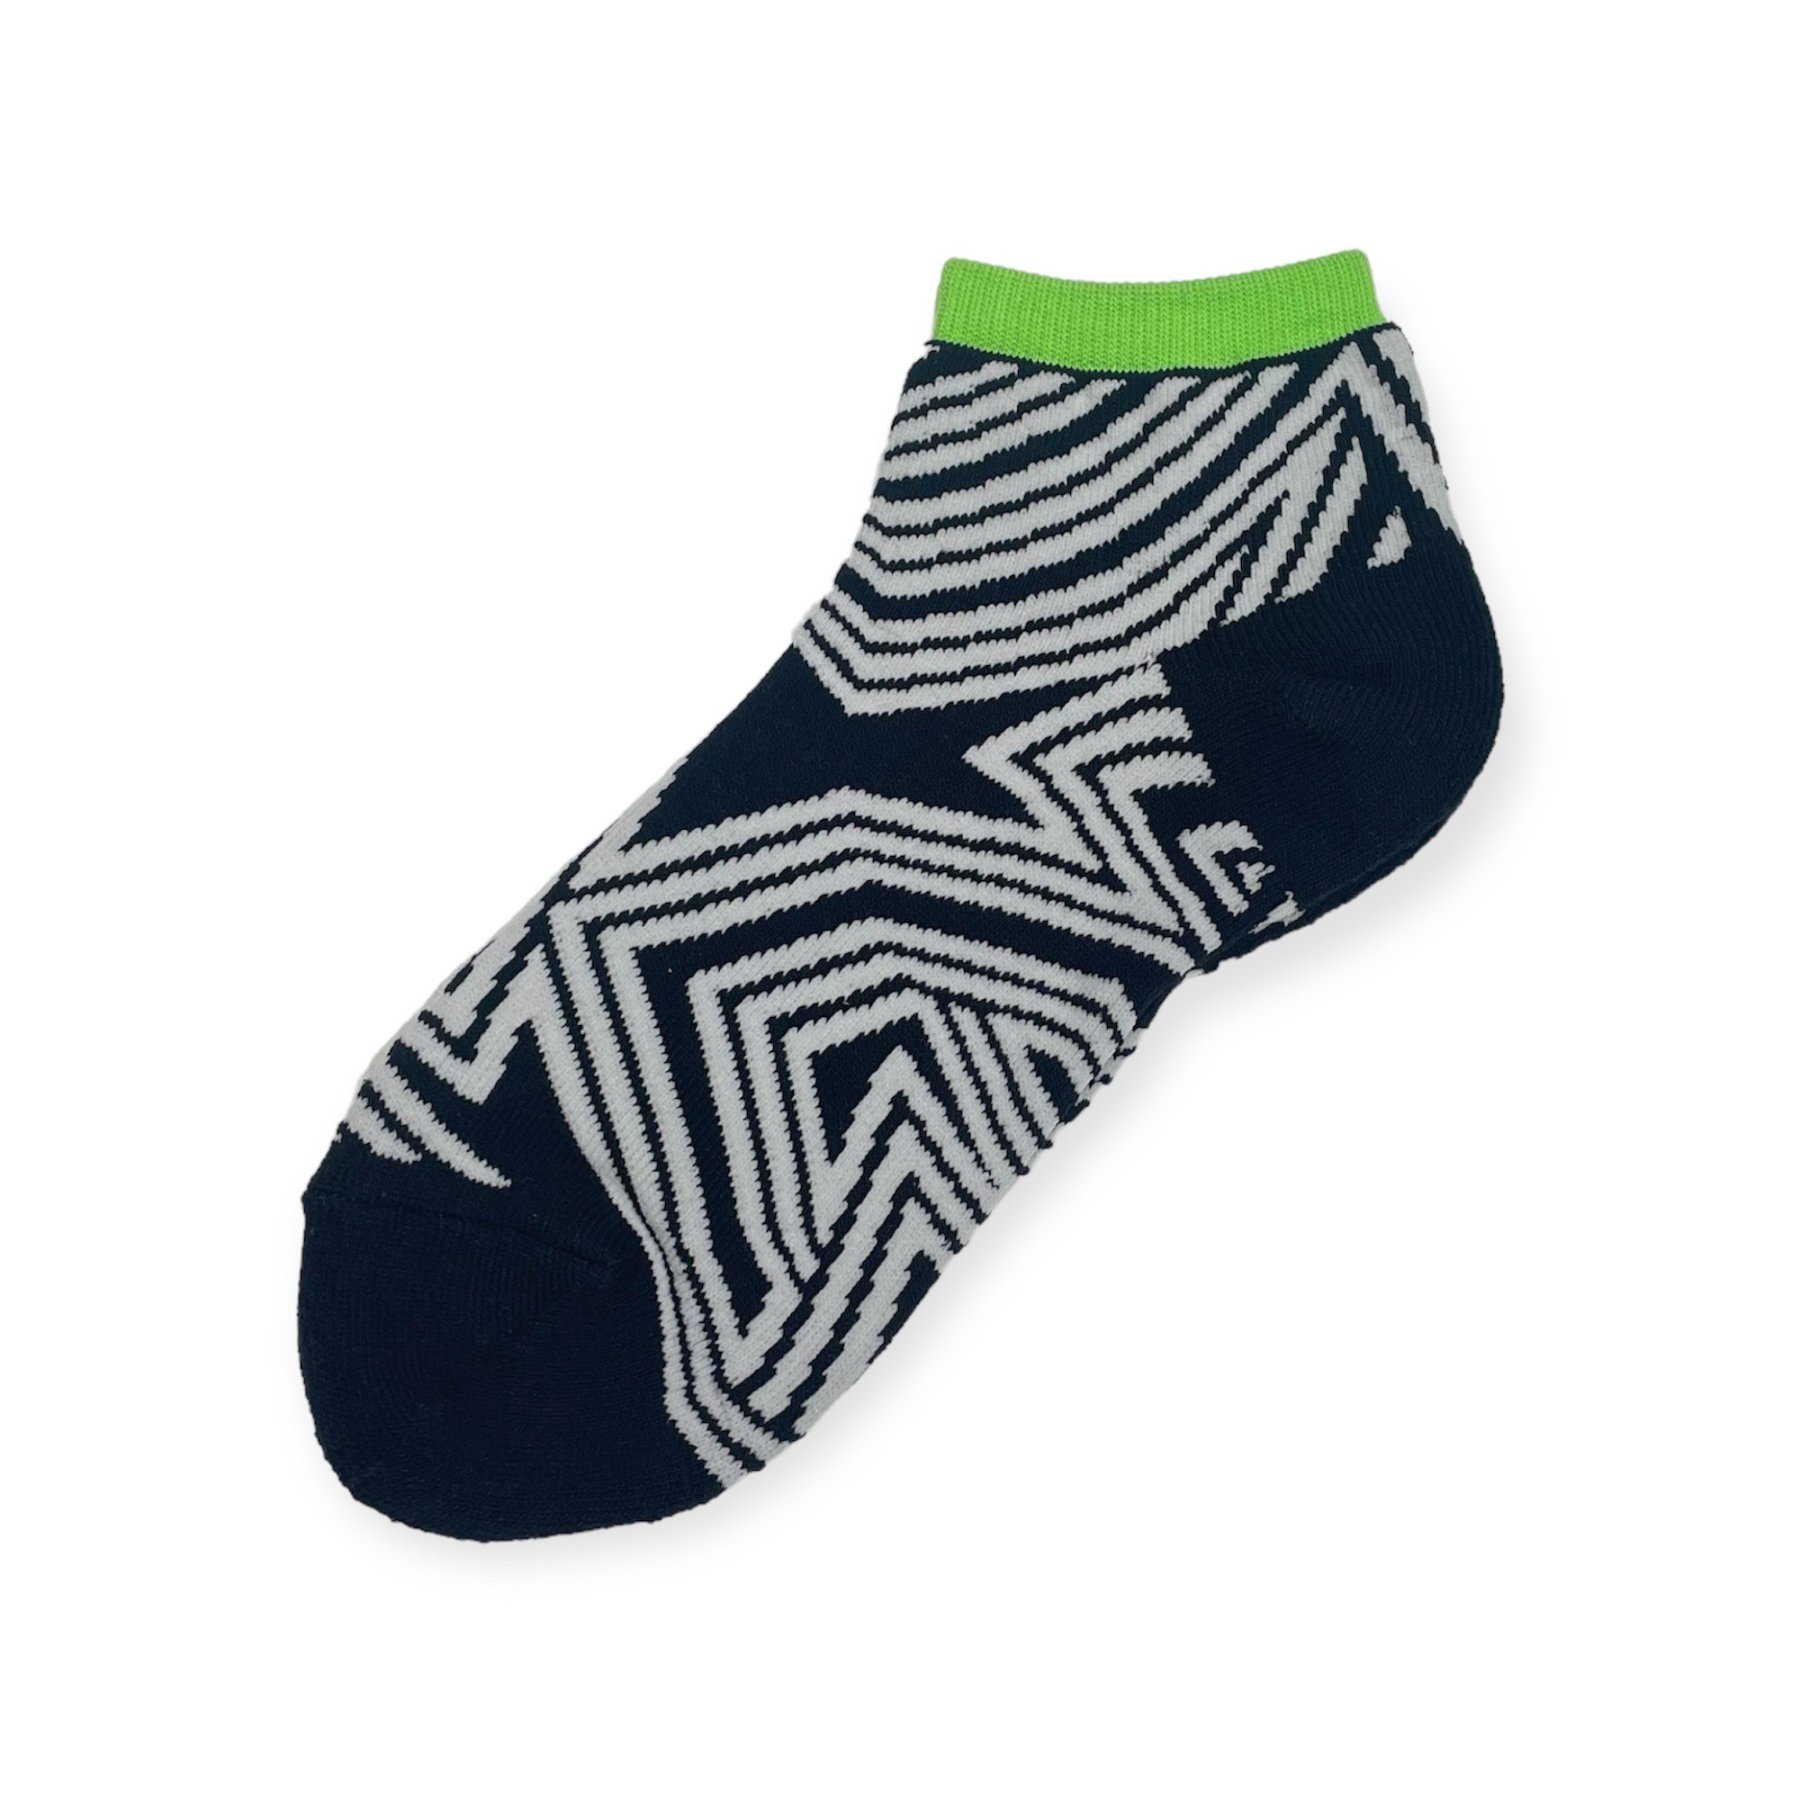 <img class='new_mark_img1' src='https://img.shop-pro.jp/img/new/icons5.gif' style='border:none;display:inline;margin:0px;padding:0px;width:auto;' />Star Tribal ankle socks/MEN